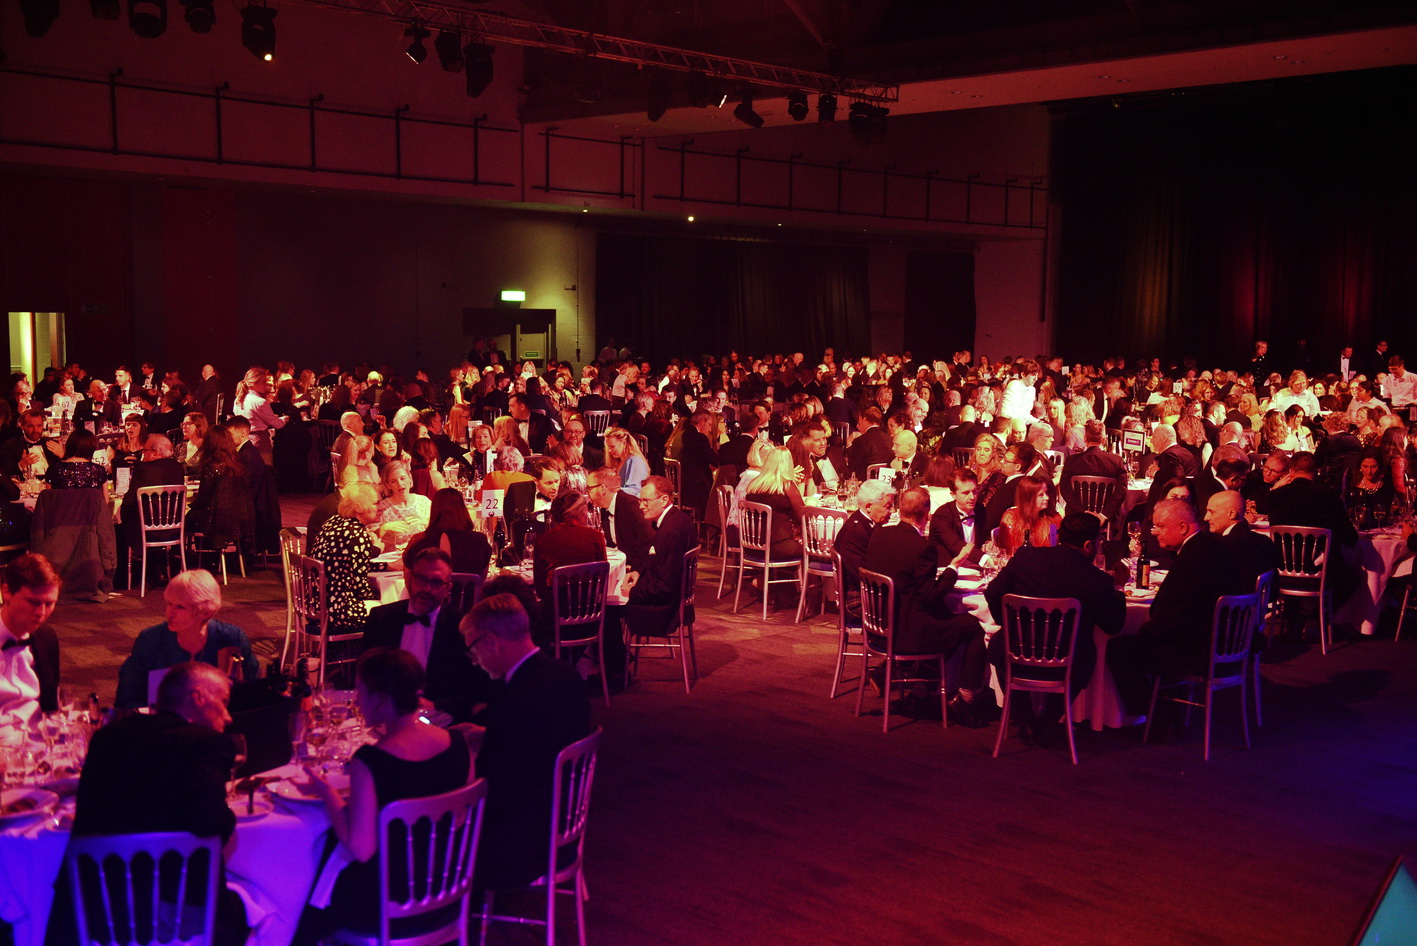 Times Higher Education Awards photography Liverpool